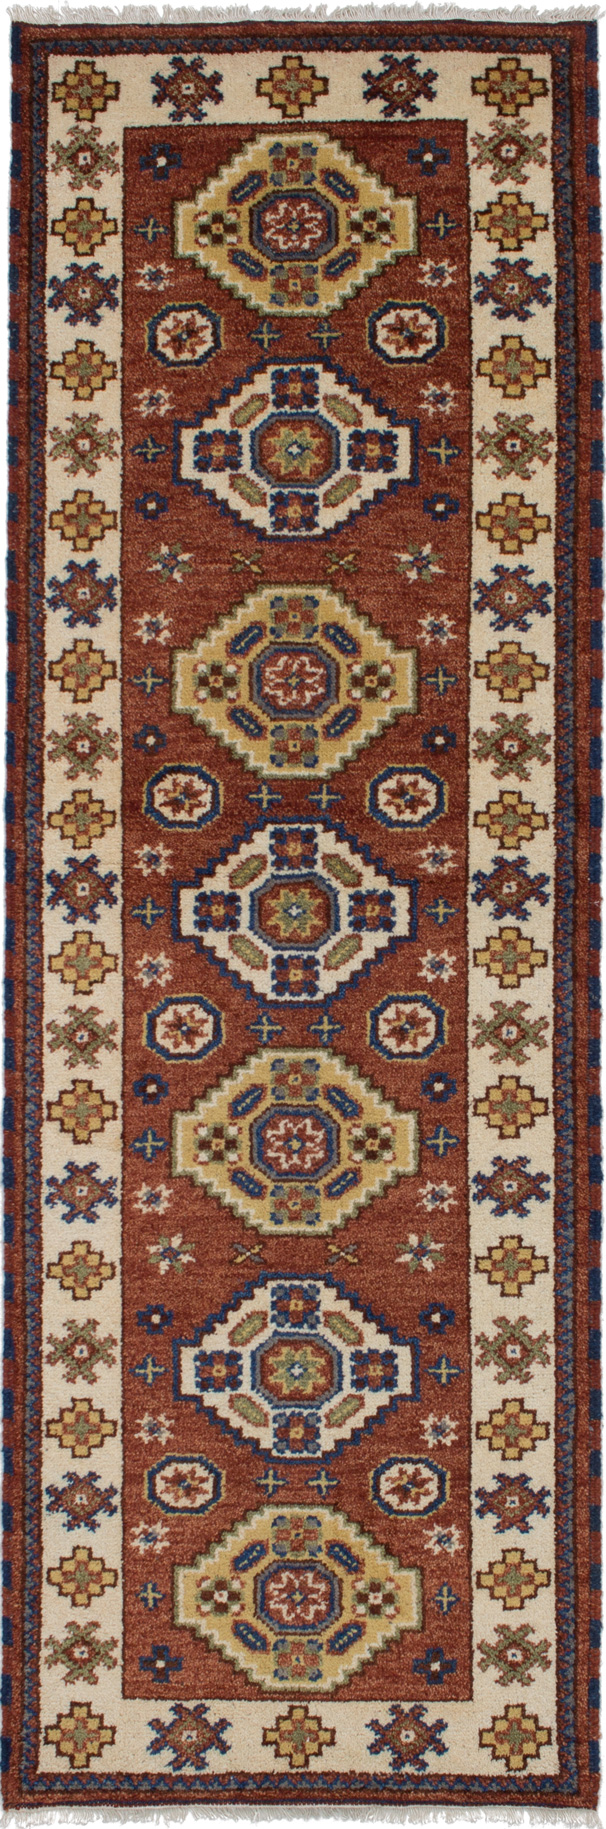 Hand-knotted Royal Kazak Brown Wool Rug 2'10" x 8'7" Size: 2'10" x 8'7"  